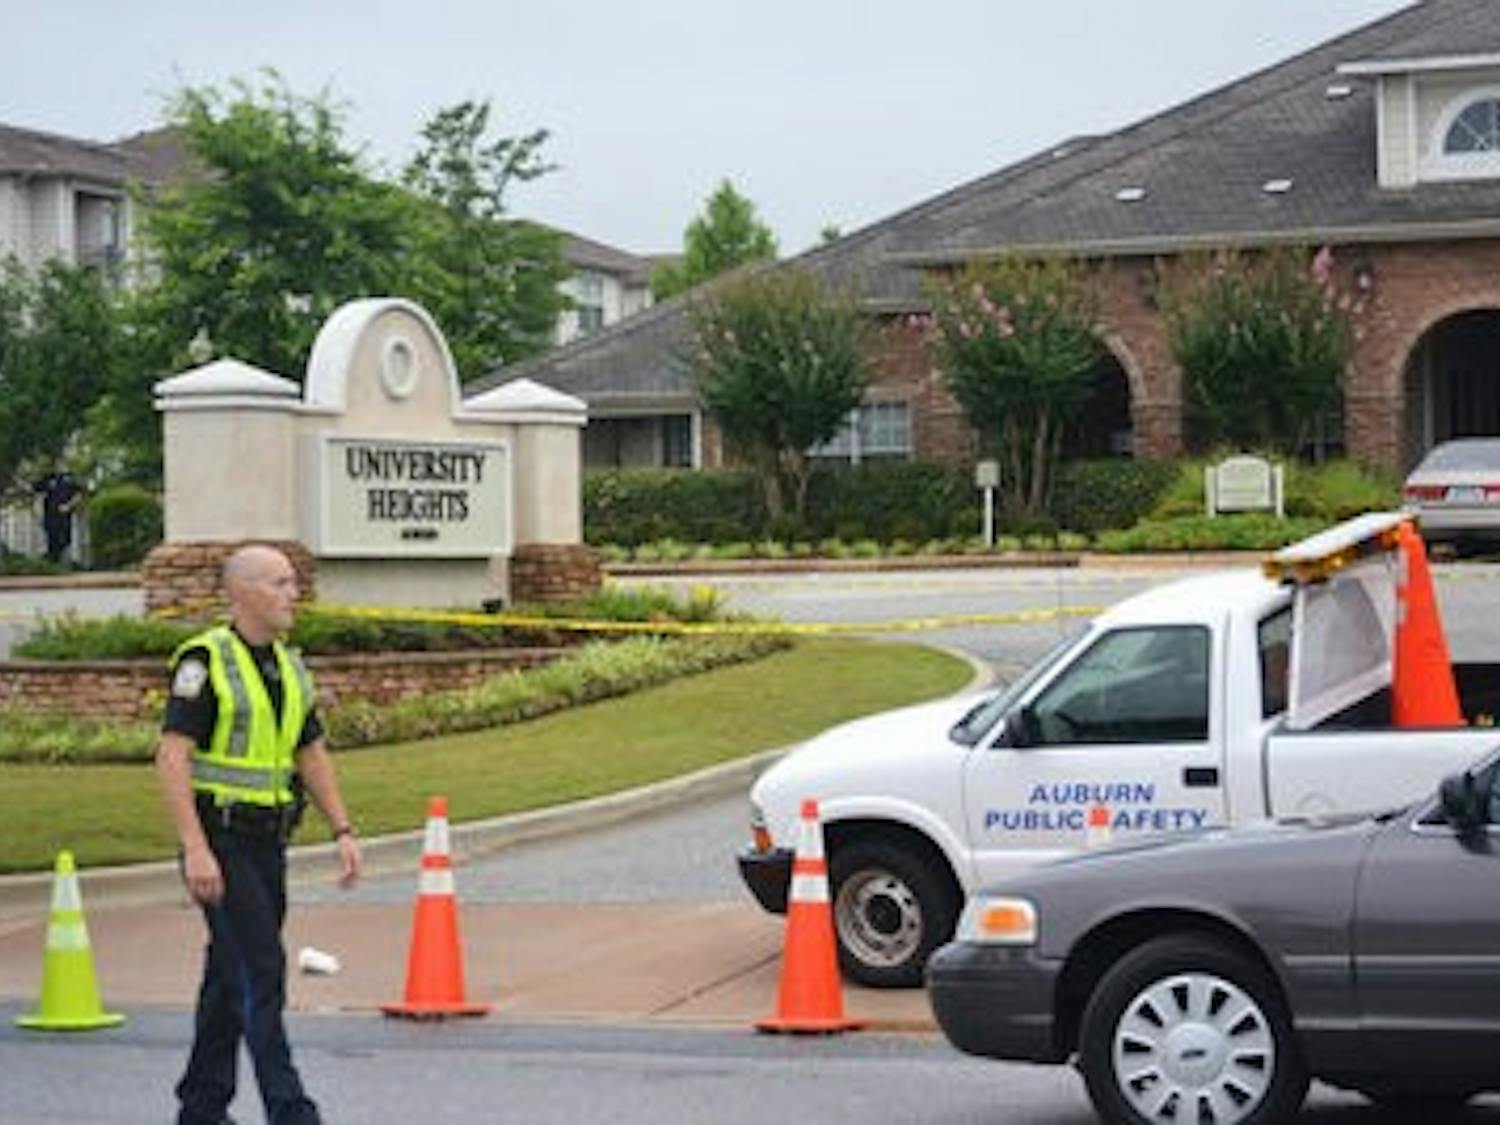 Auburn awaits an official statement from city officials after a shooting at University Heights apartment complex on West Longleaf Drive Saturday night. (Danielle Lowe / PHOTO EDITOR)